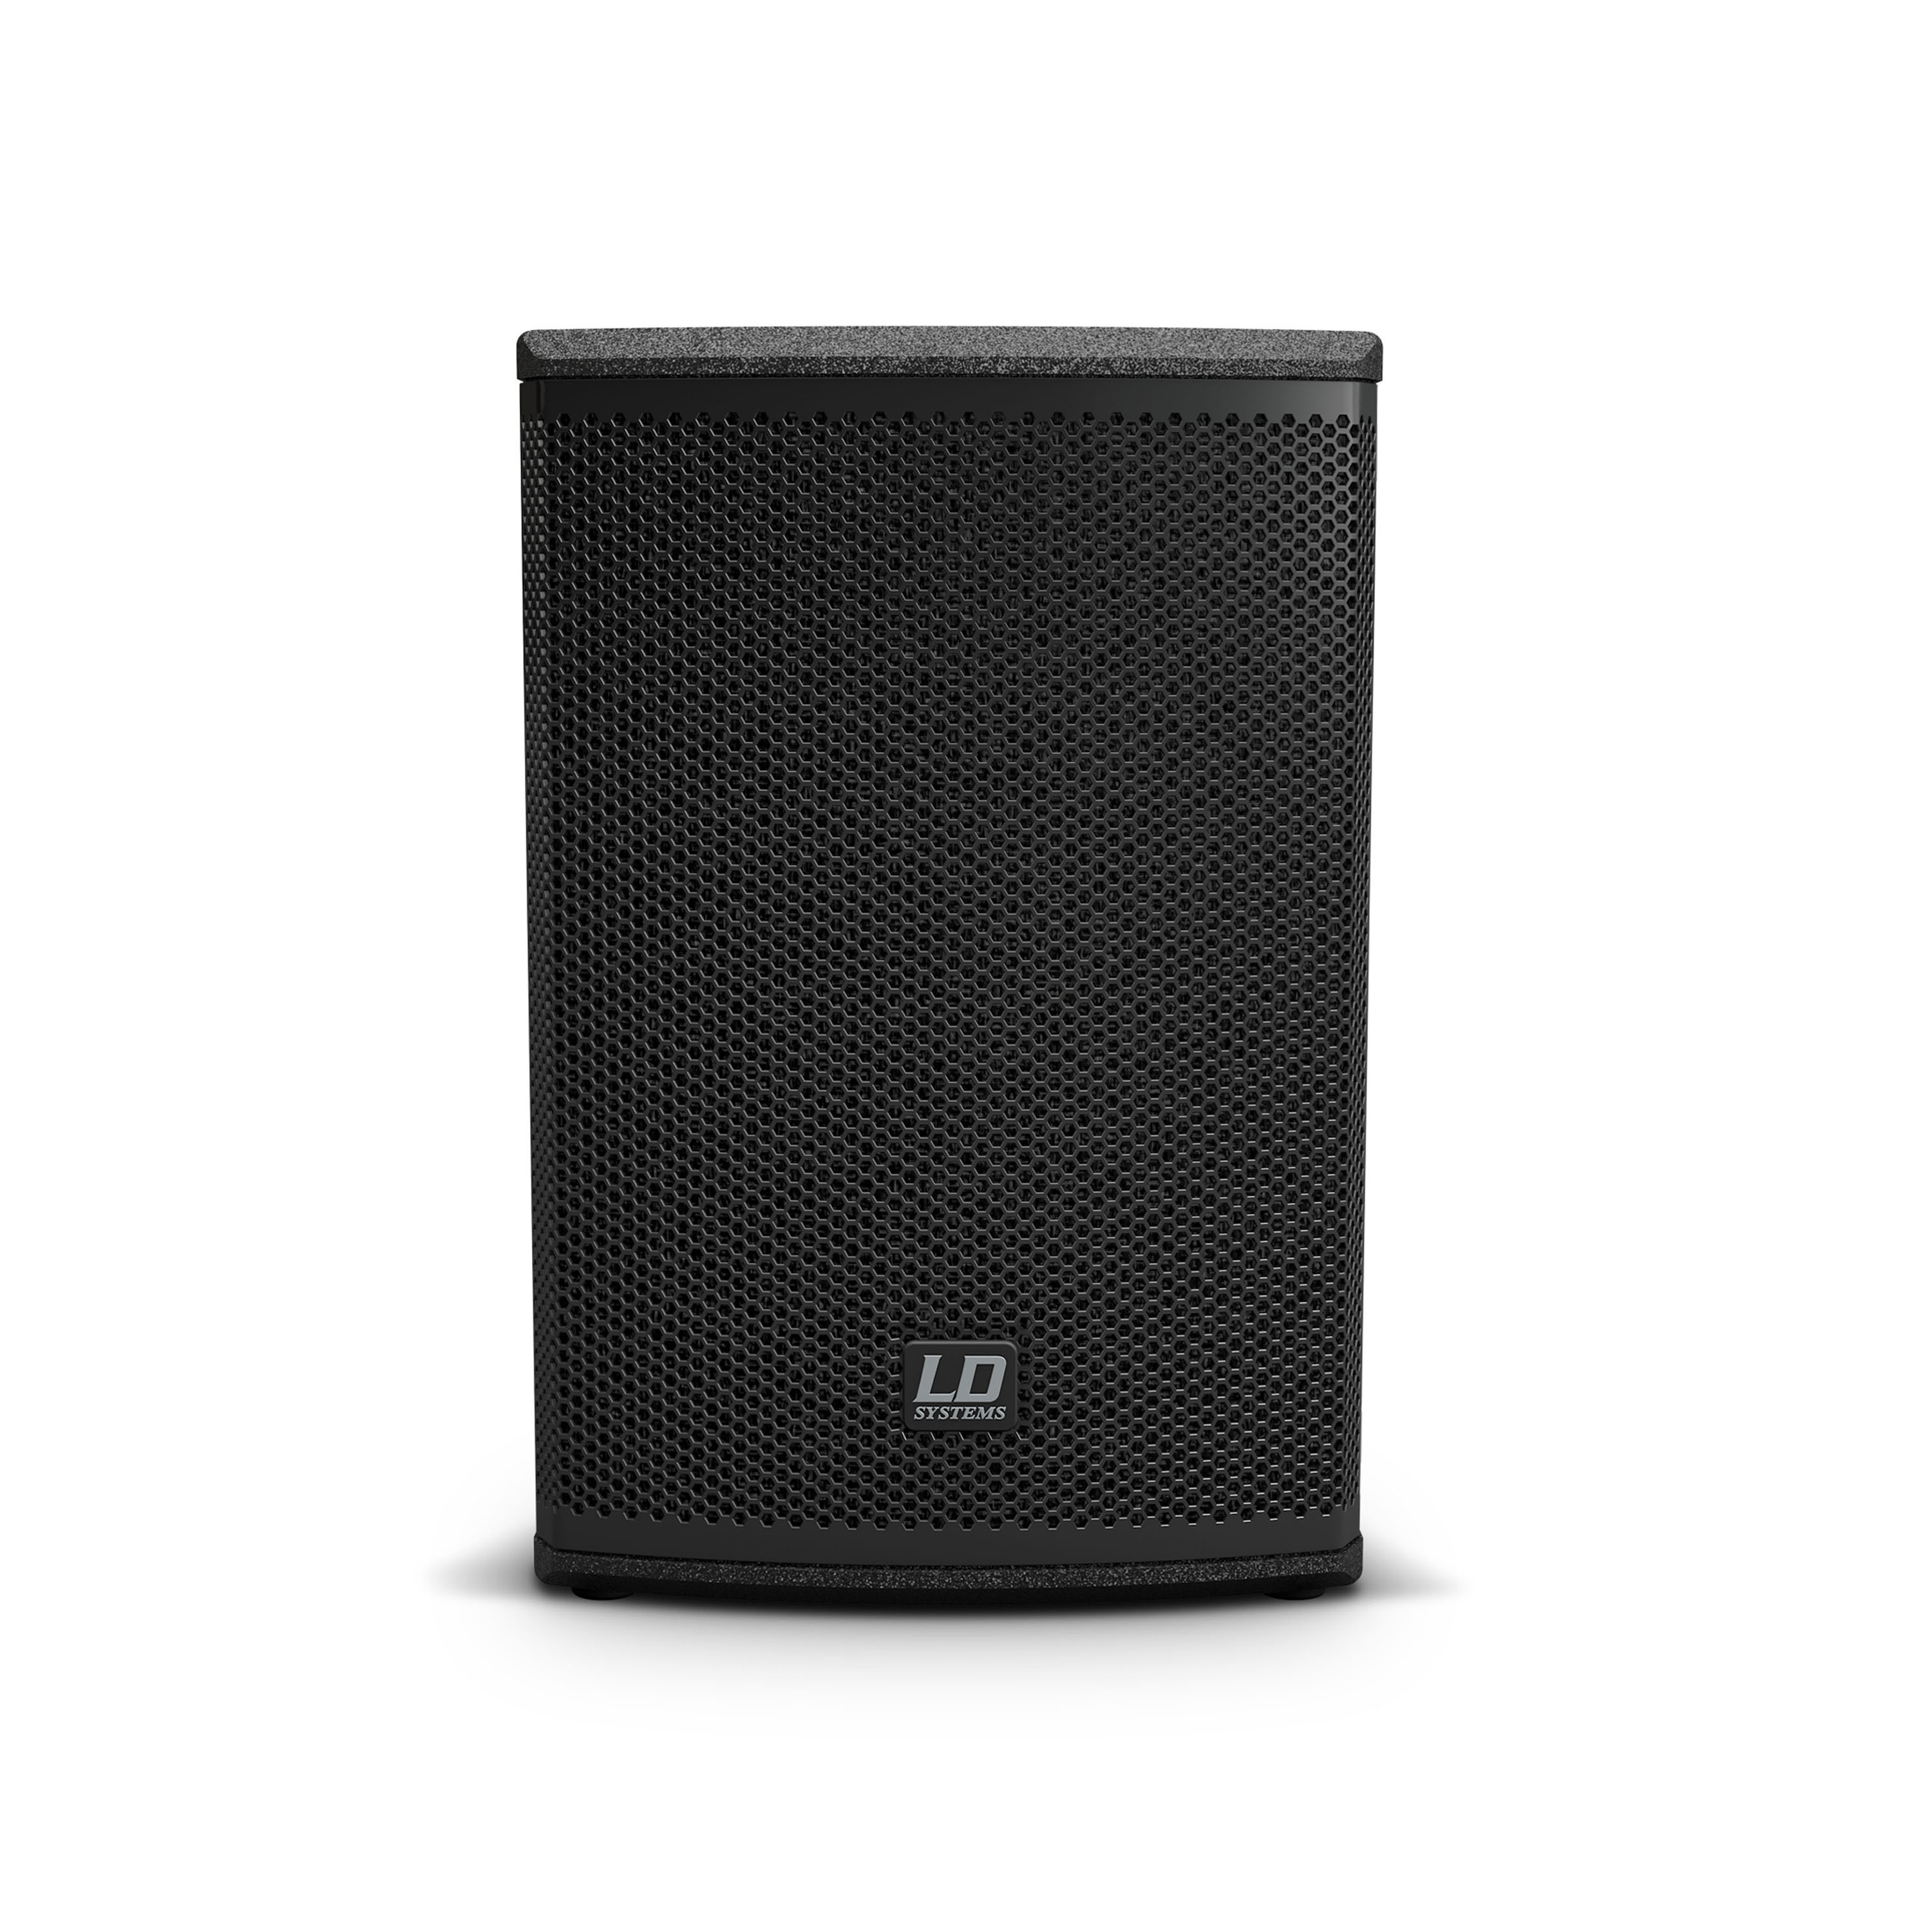 Ld Systems Mix 6 A G3 - Sono Portable - Variation 2